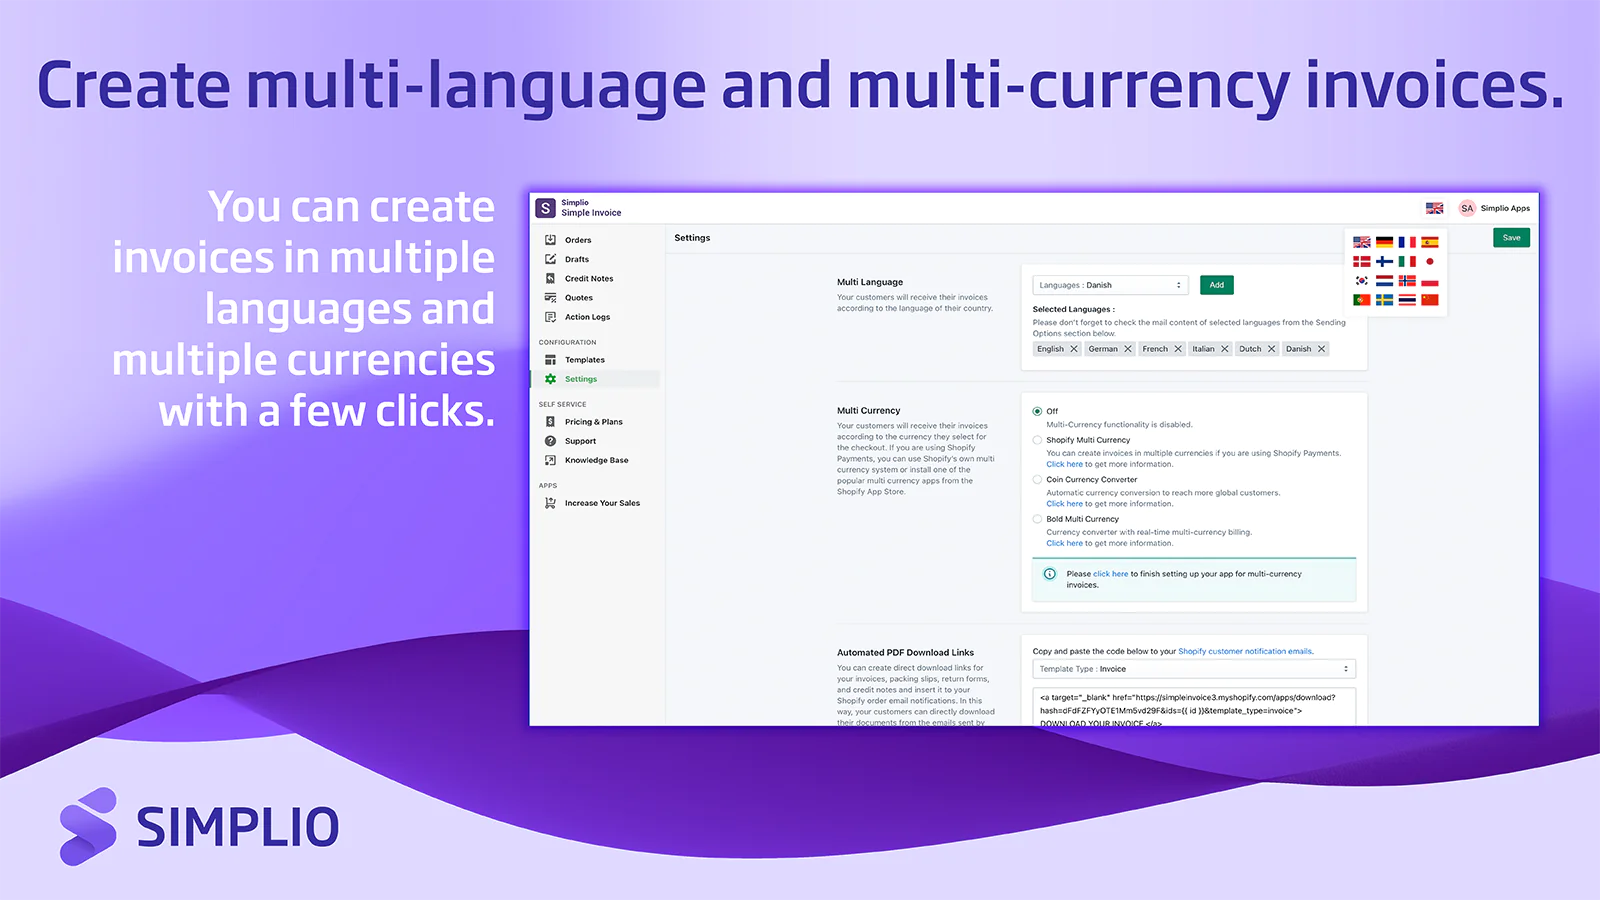 Create multi-language and multi-currency invoices.